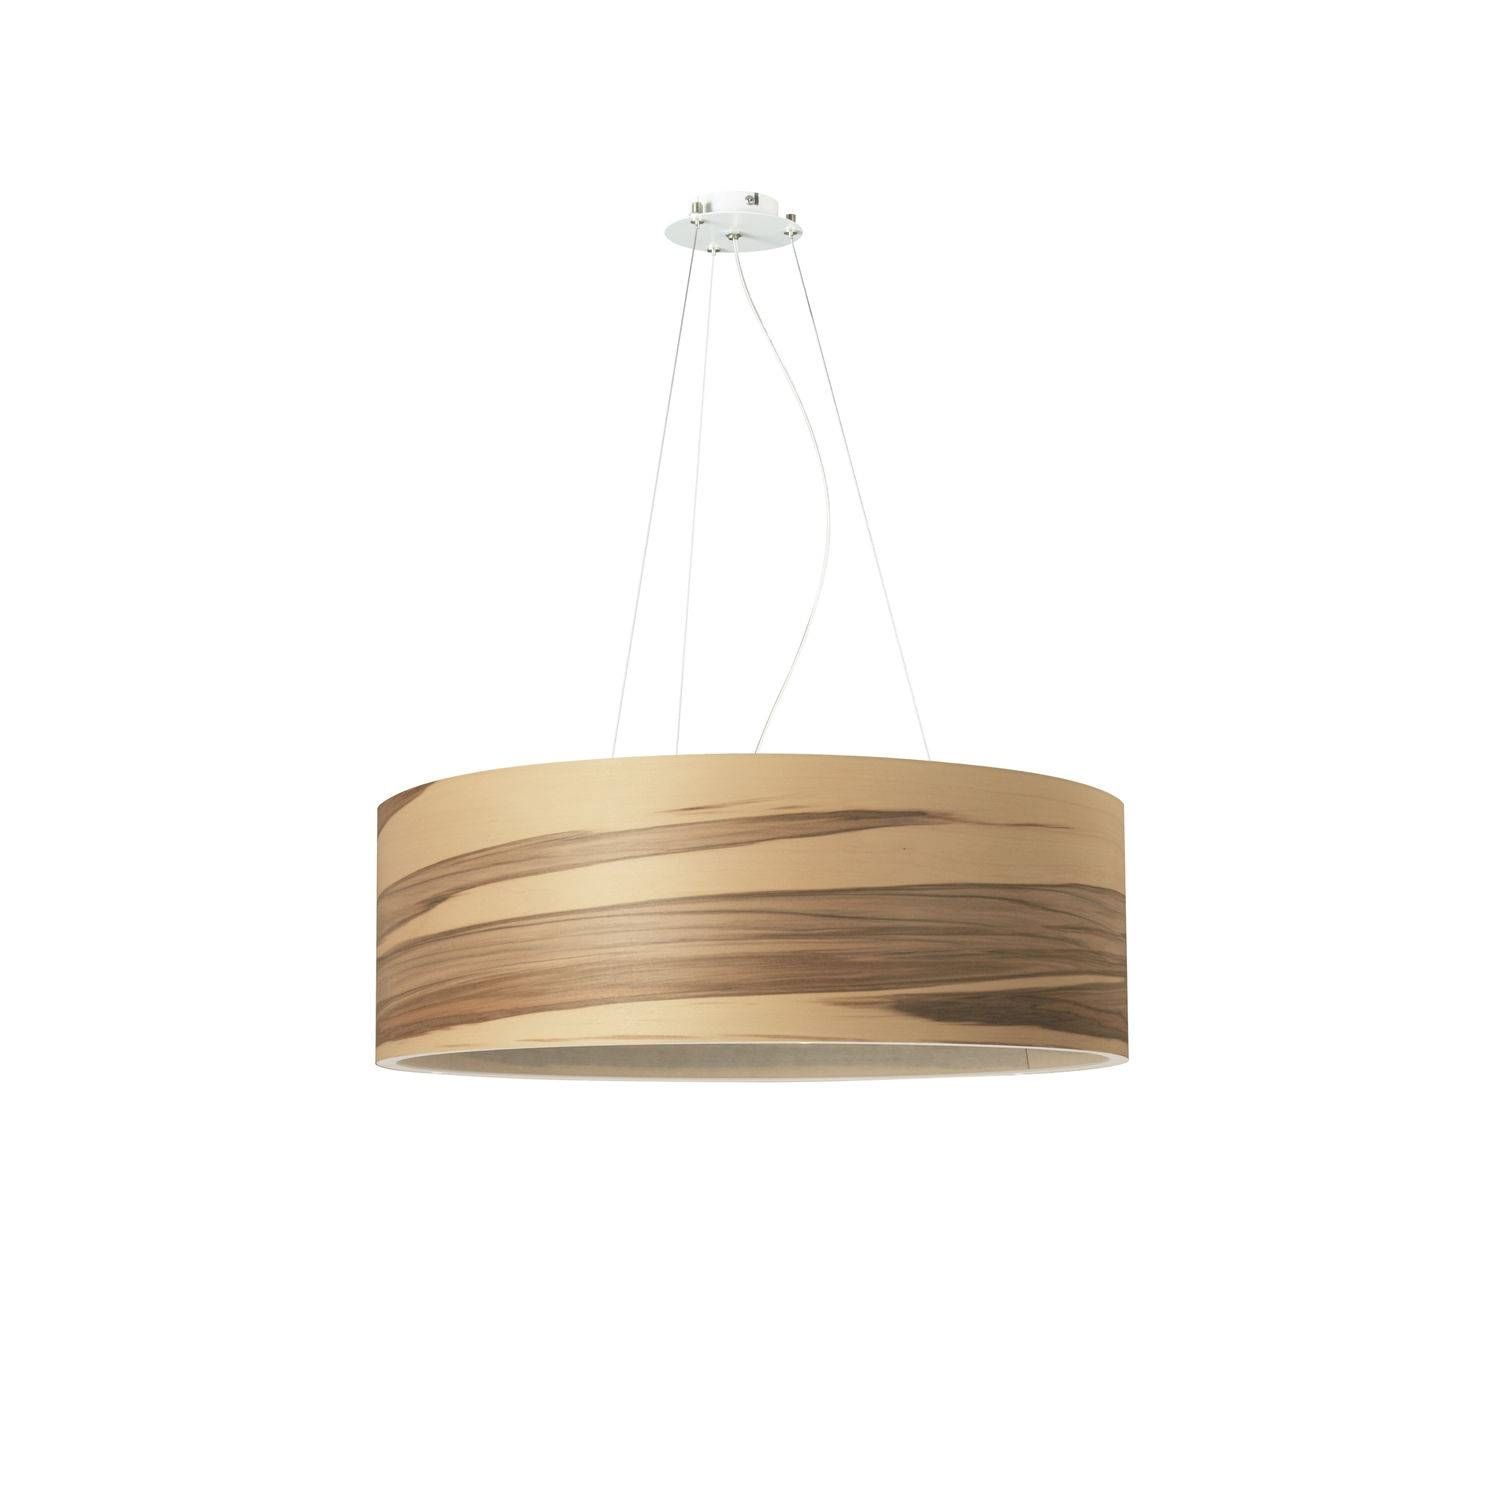 Fancy Wood Pendant Lights 77 In Remote Control Ceiling Fan With With Remote Control Pendant Lights (View 15 of 15)